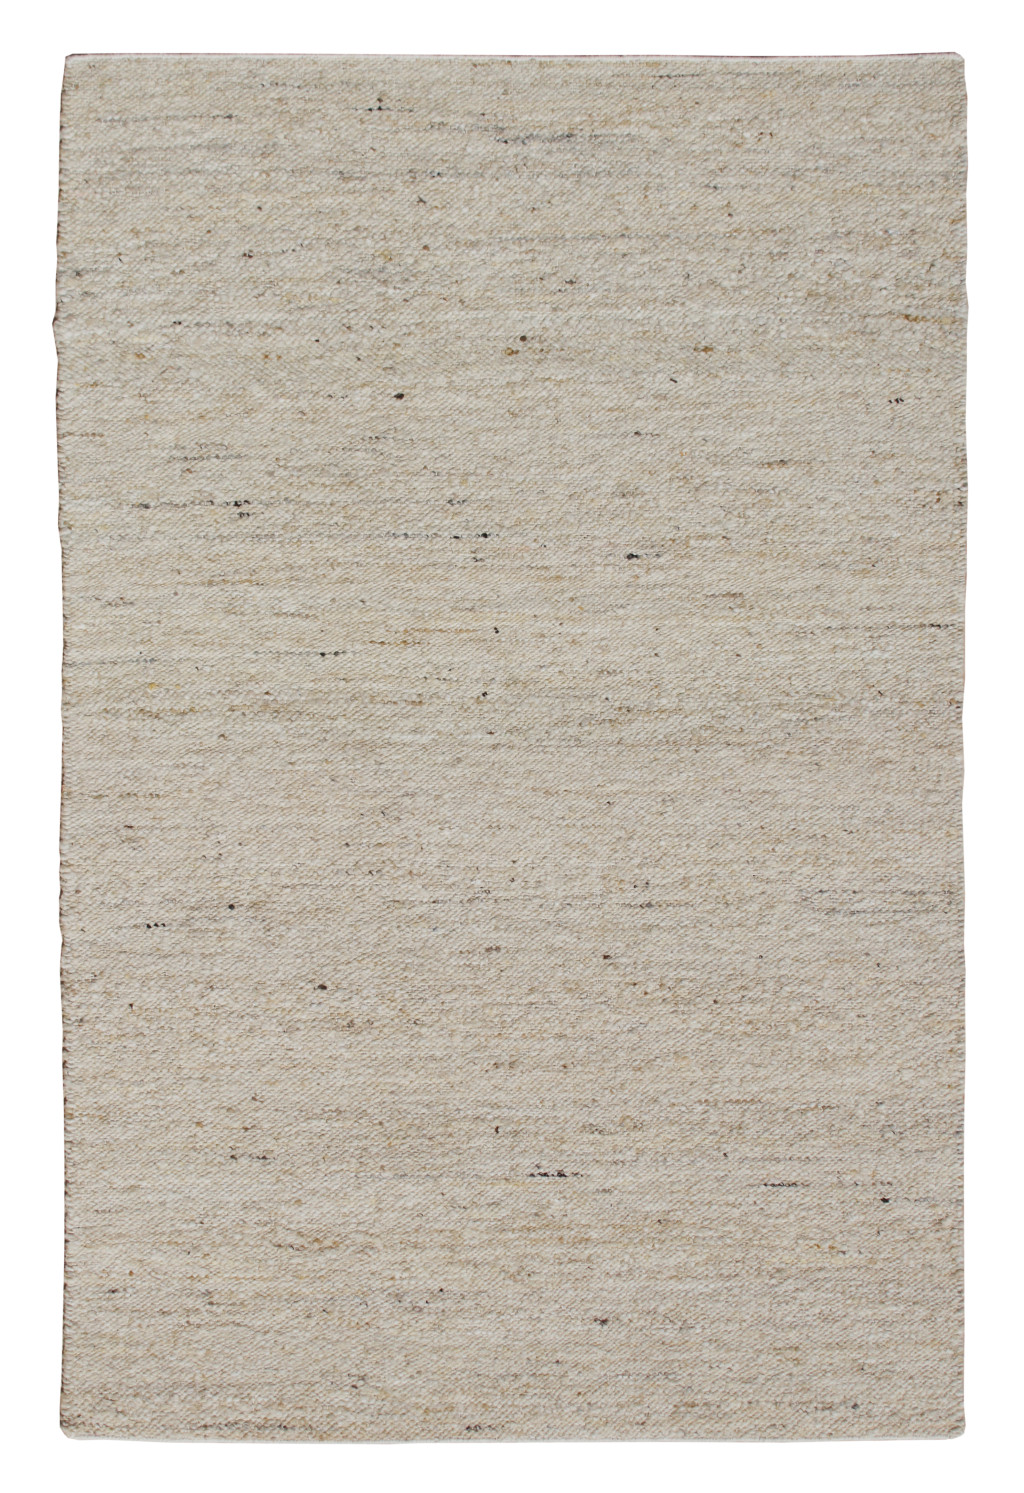 5' x 8' White Wool Hand Woven Area Rug-544140-1